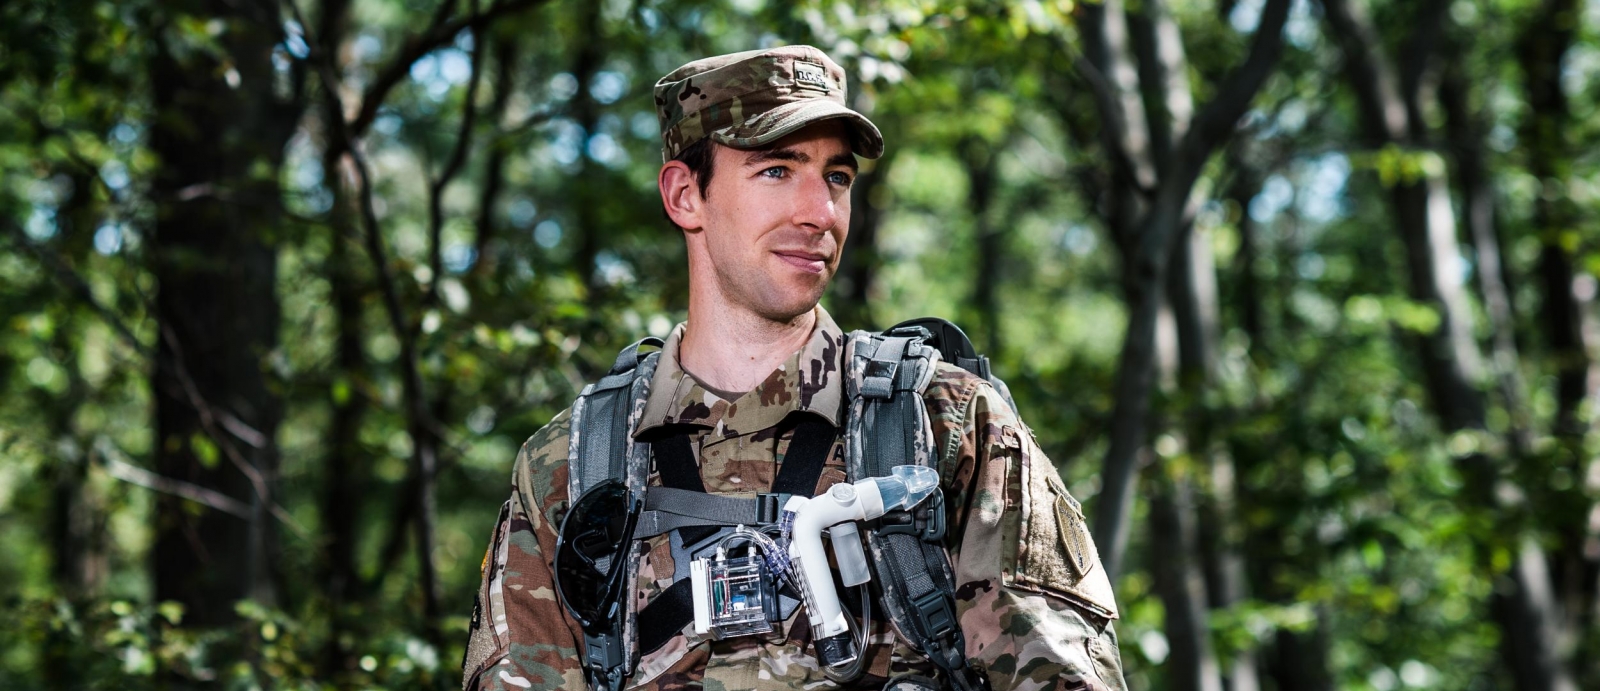 The COBRA sensor is more portable and cost-effective than existing indirect calorimetry sensors. It includes a chest harness and bite grip that enable hands-free use of the system during exercise and training.